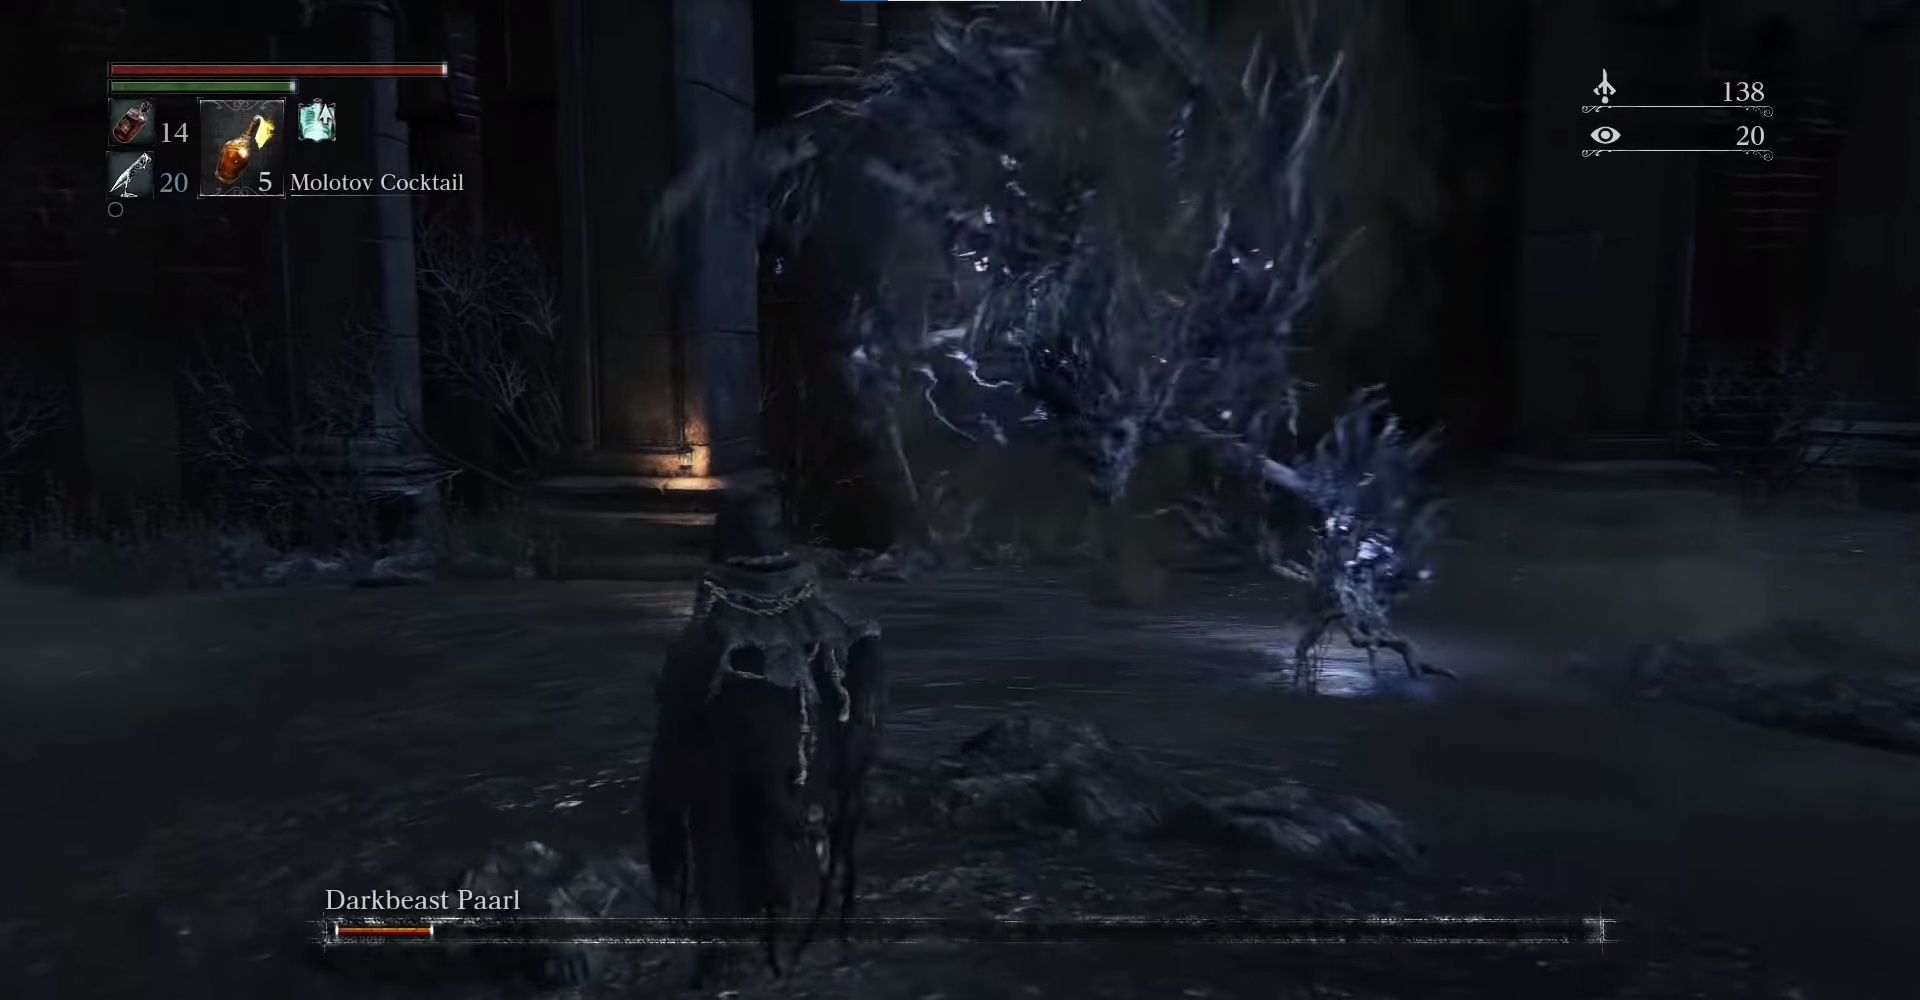 Bloodborne The Hunter fights Darkbeast Paarl in an arena full of corpses.